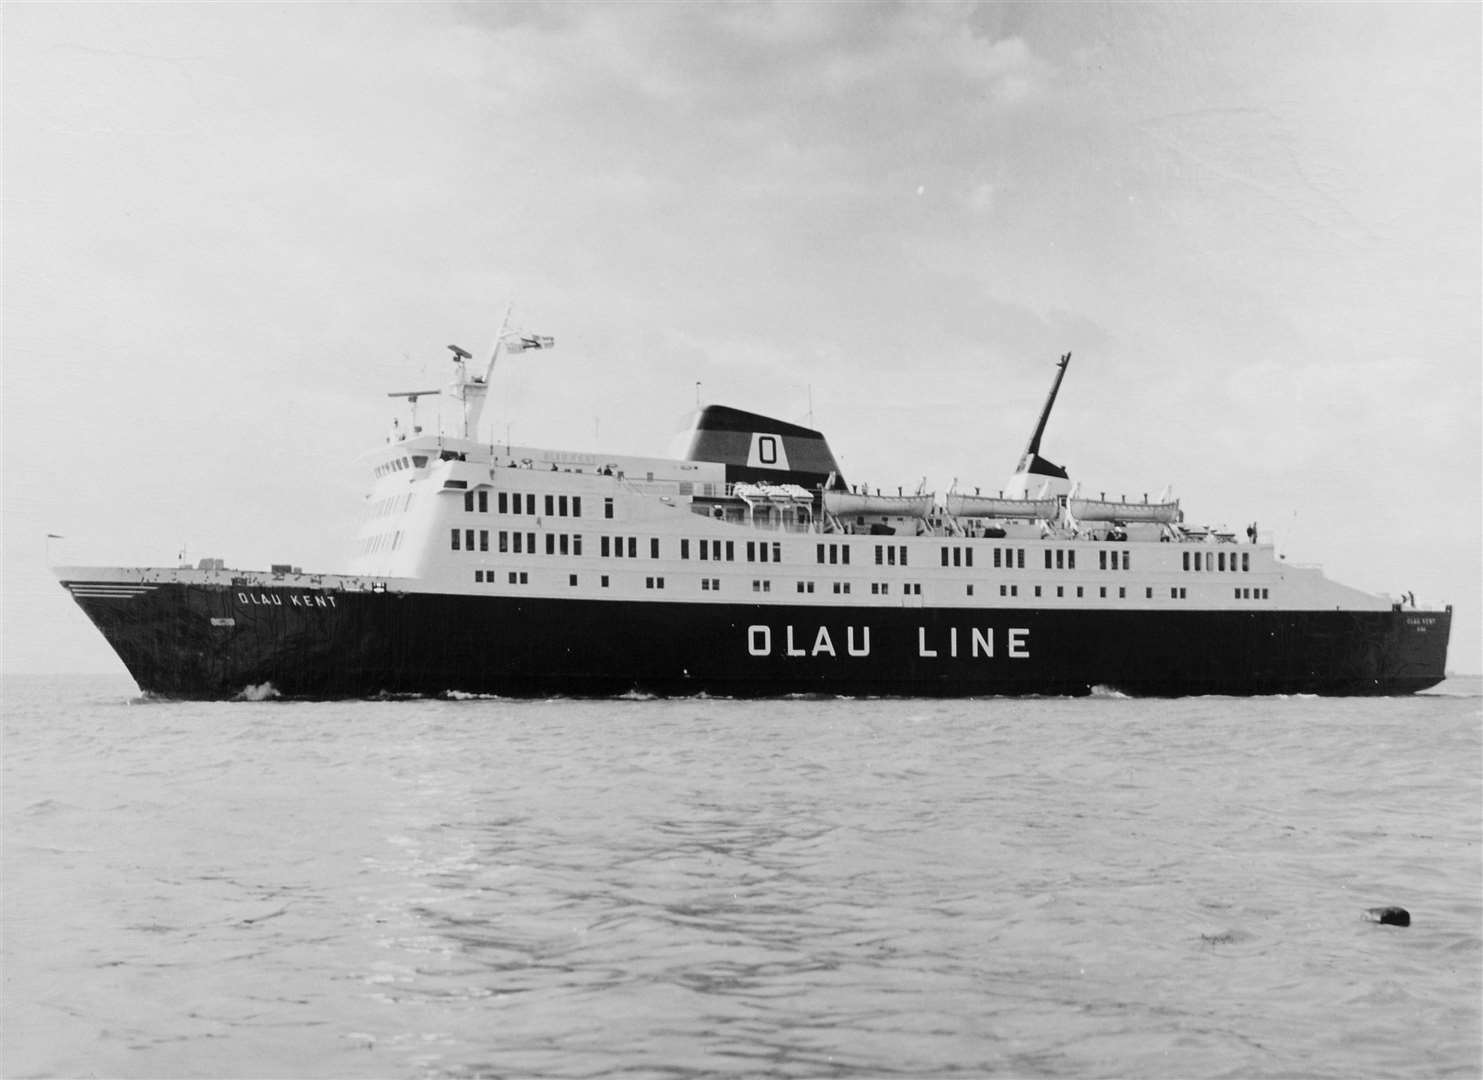 The Olau Line operated for many years between Sheerness and Vlissingen in the Netherlands